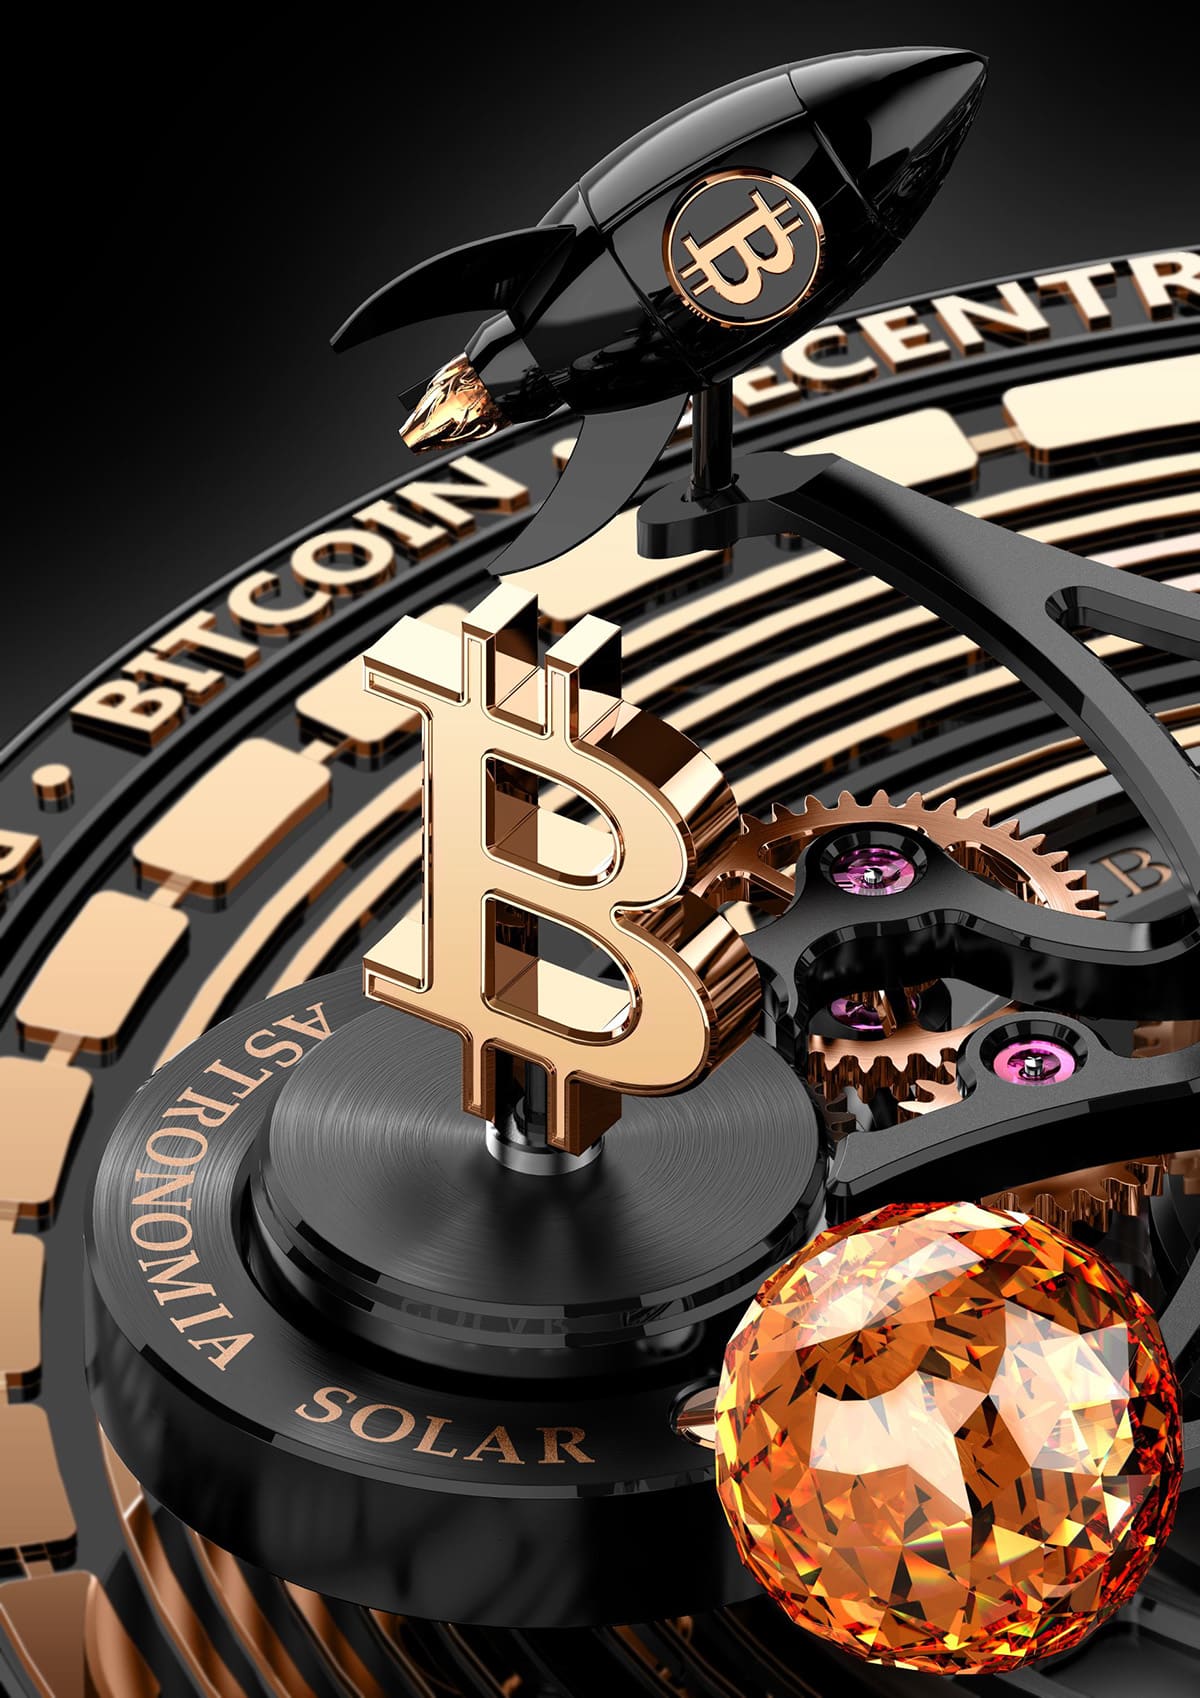 Jacob and co montre bitcoin